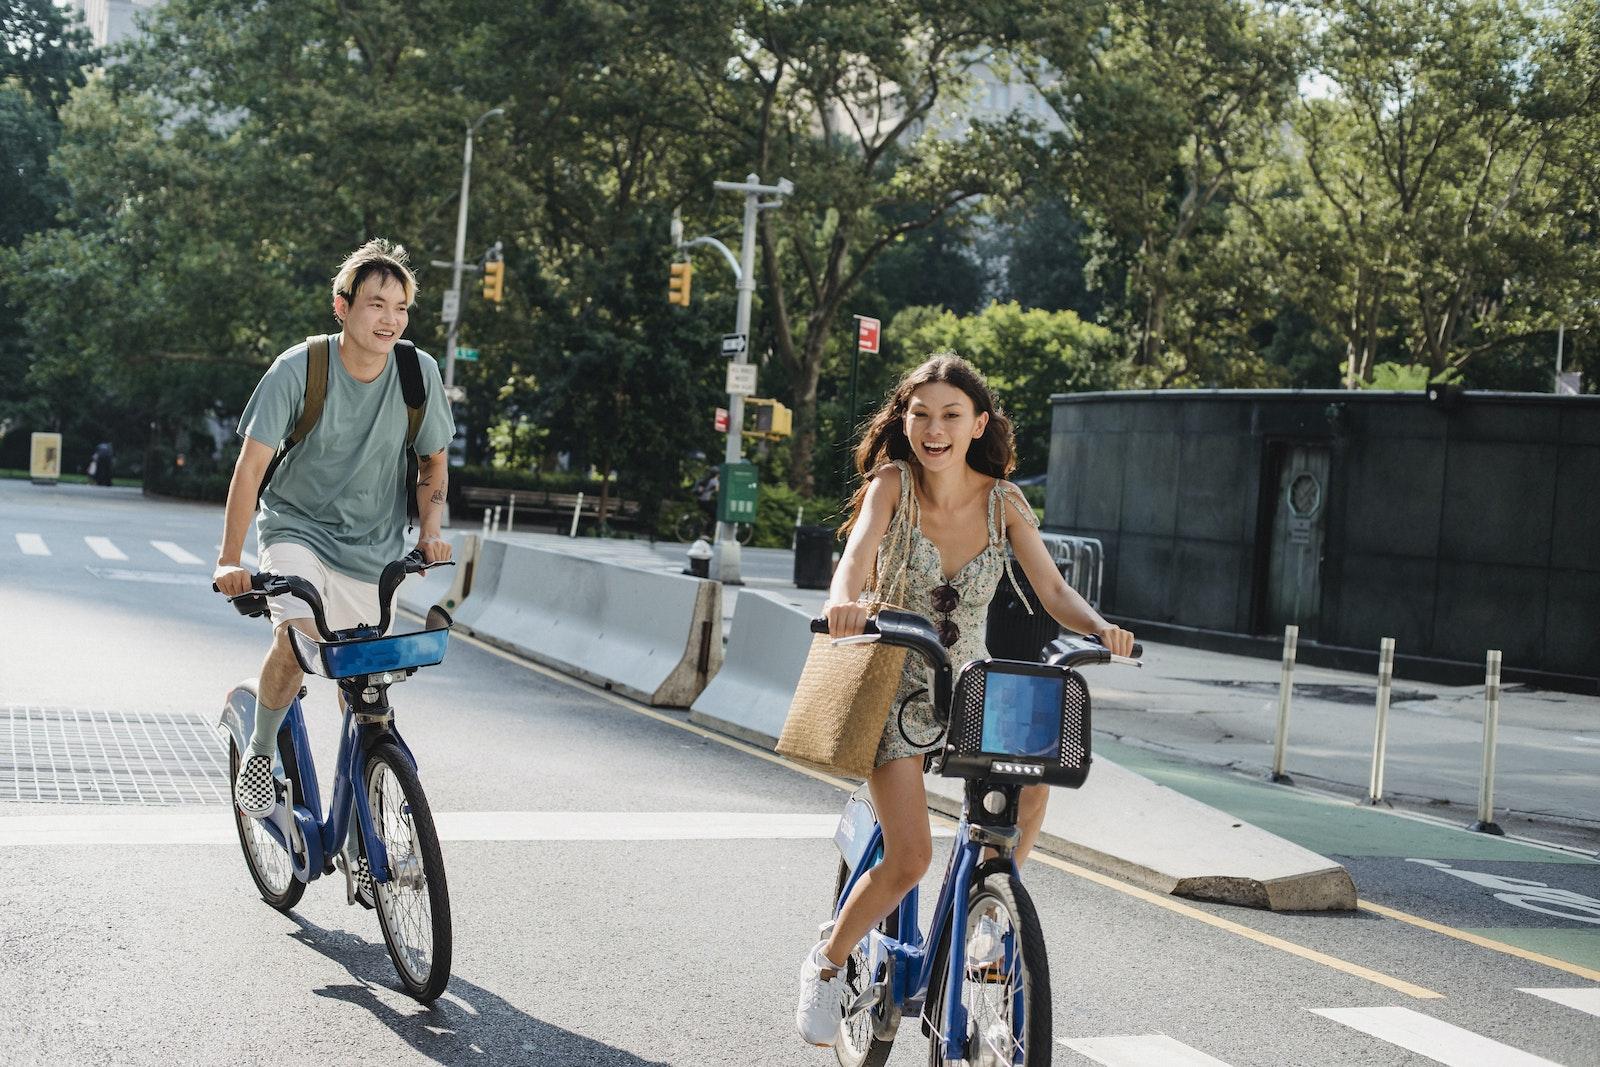 Cheerful diverse couple laughing and riding bicycles on asphalt road in city in sunny day